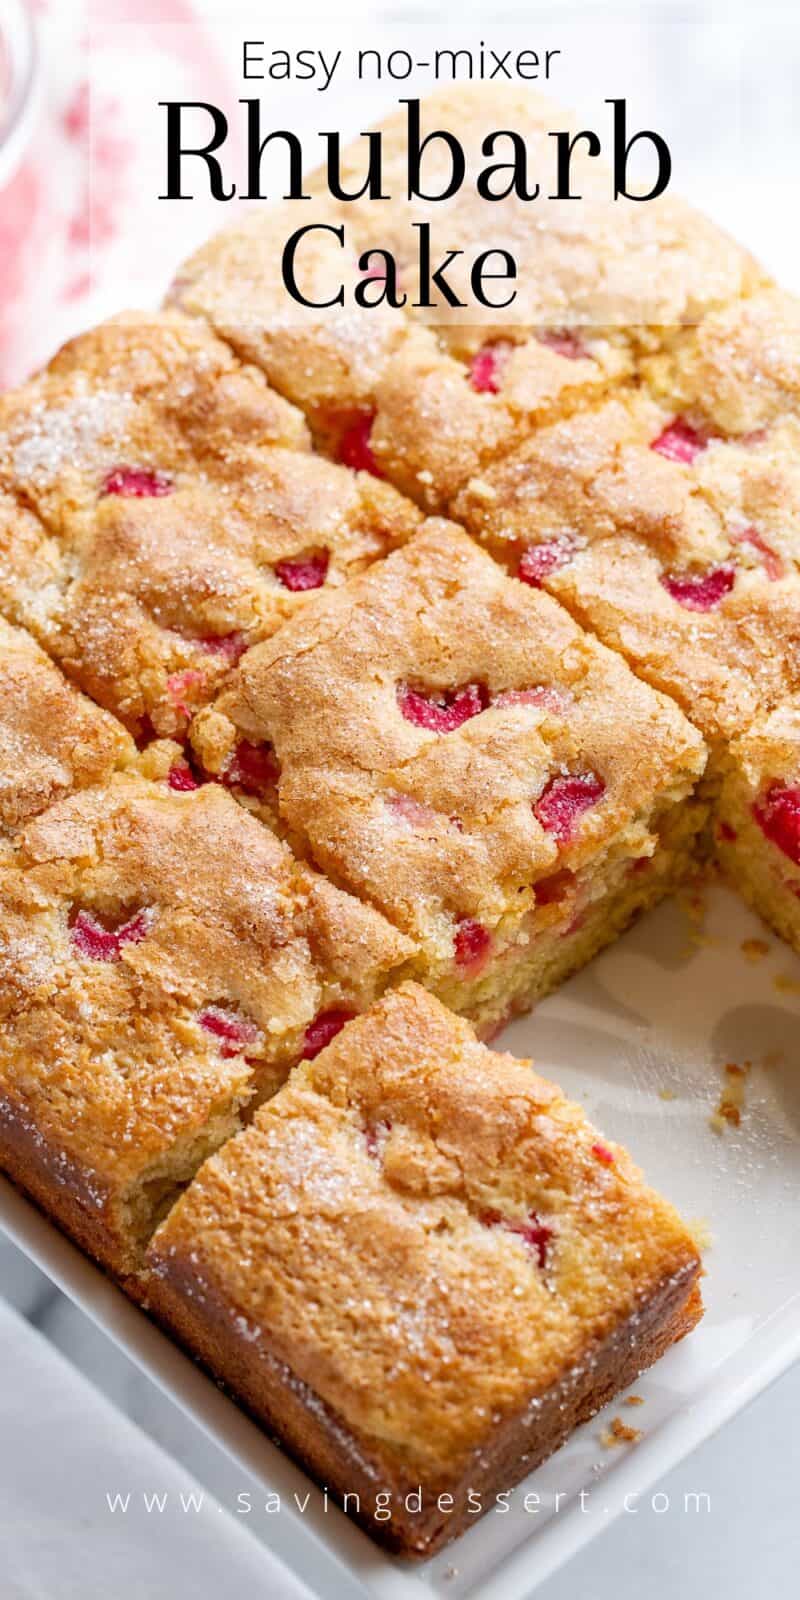 Overhead view of a sliced square rhubarb cake